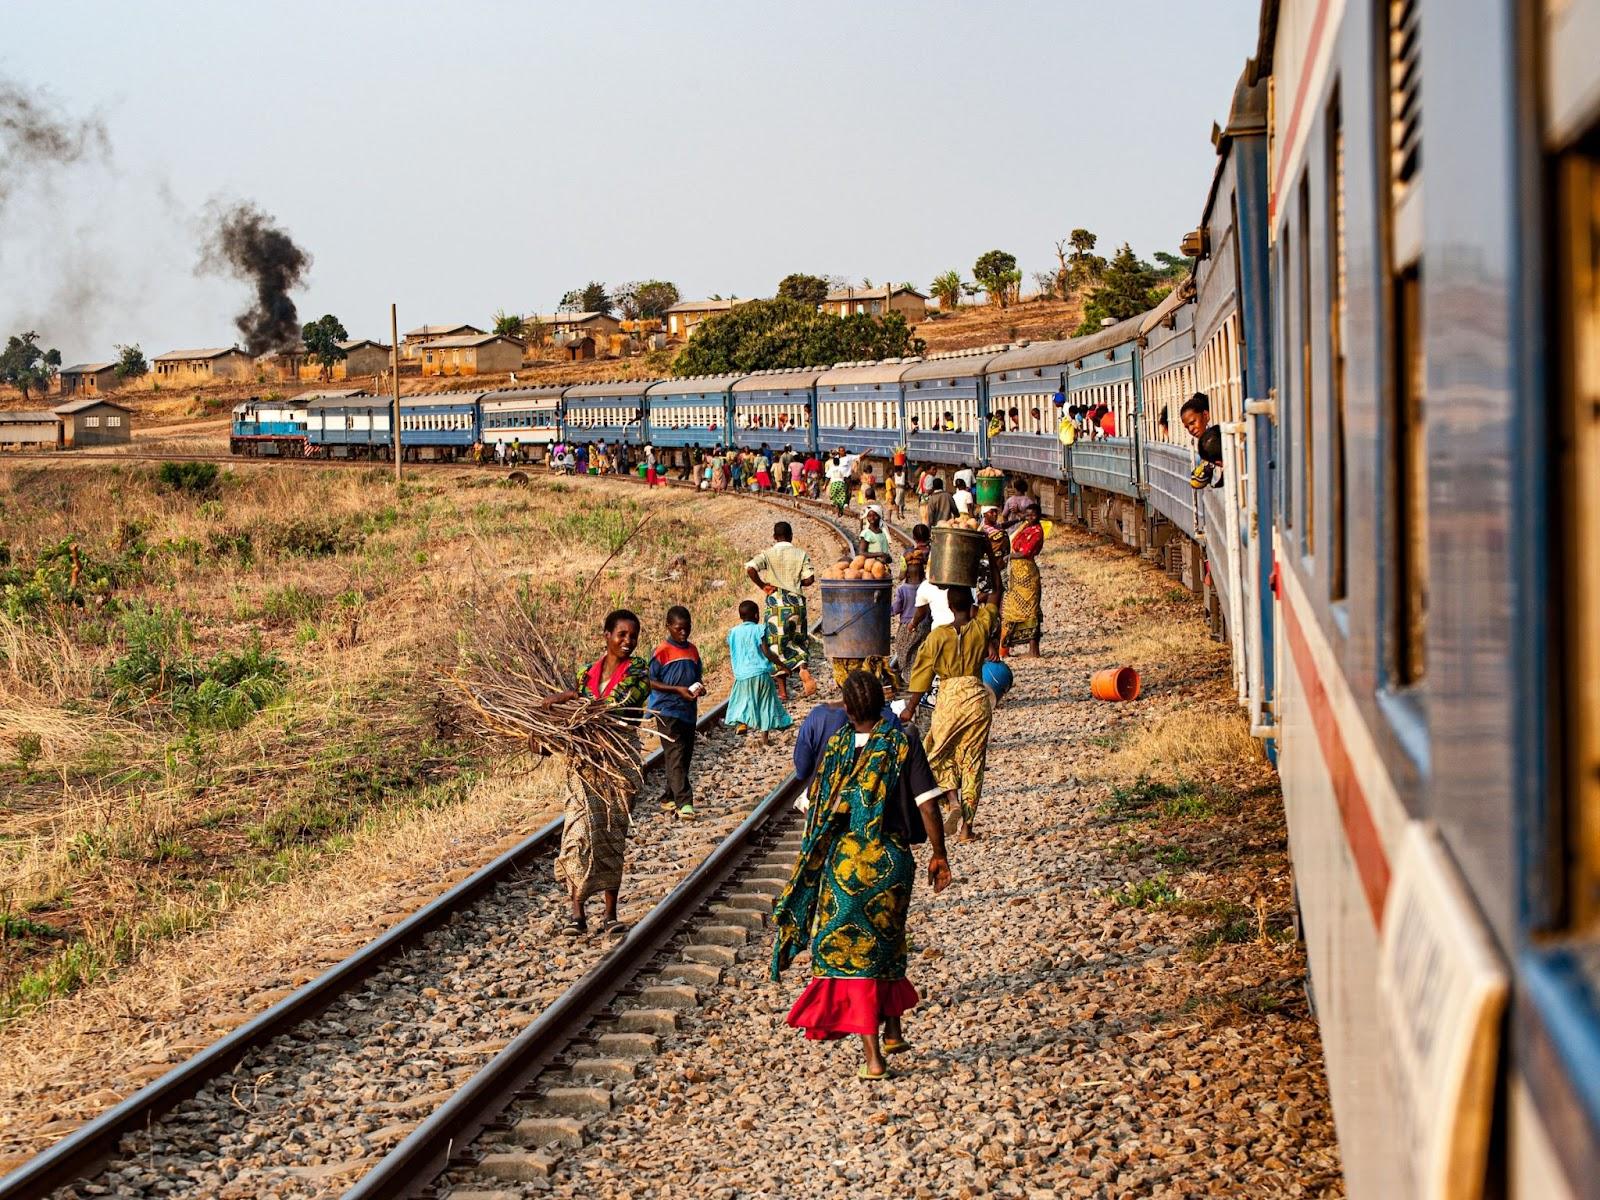 Train on the Tazara railway with lots of local people in brightly coloured, traditional clothes walking alongside